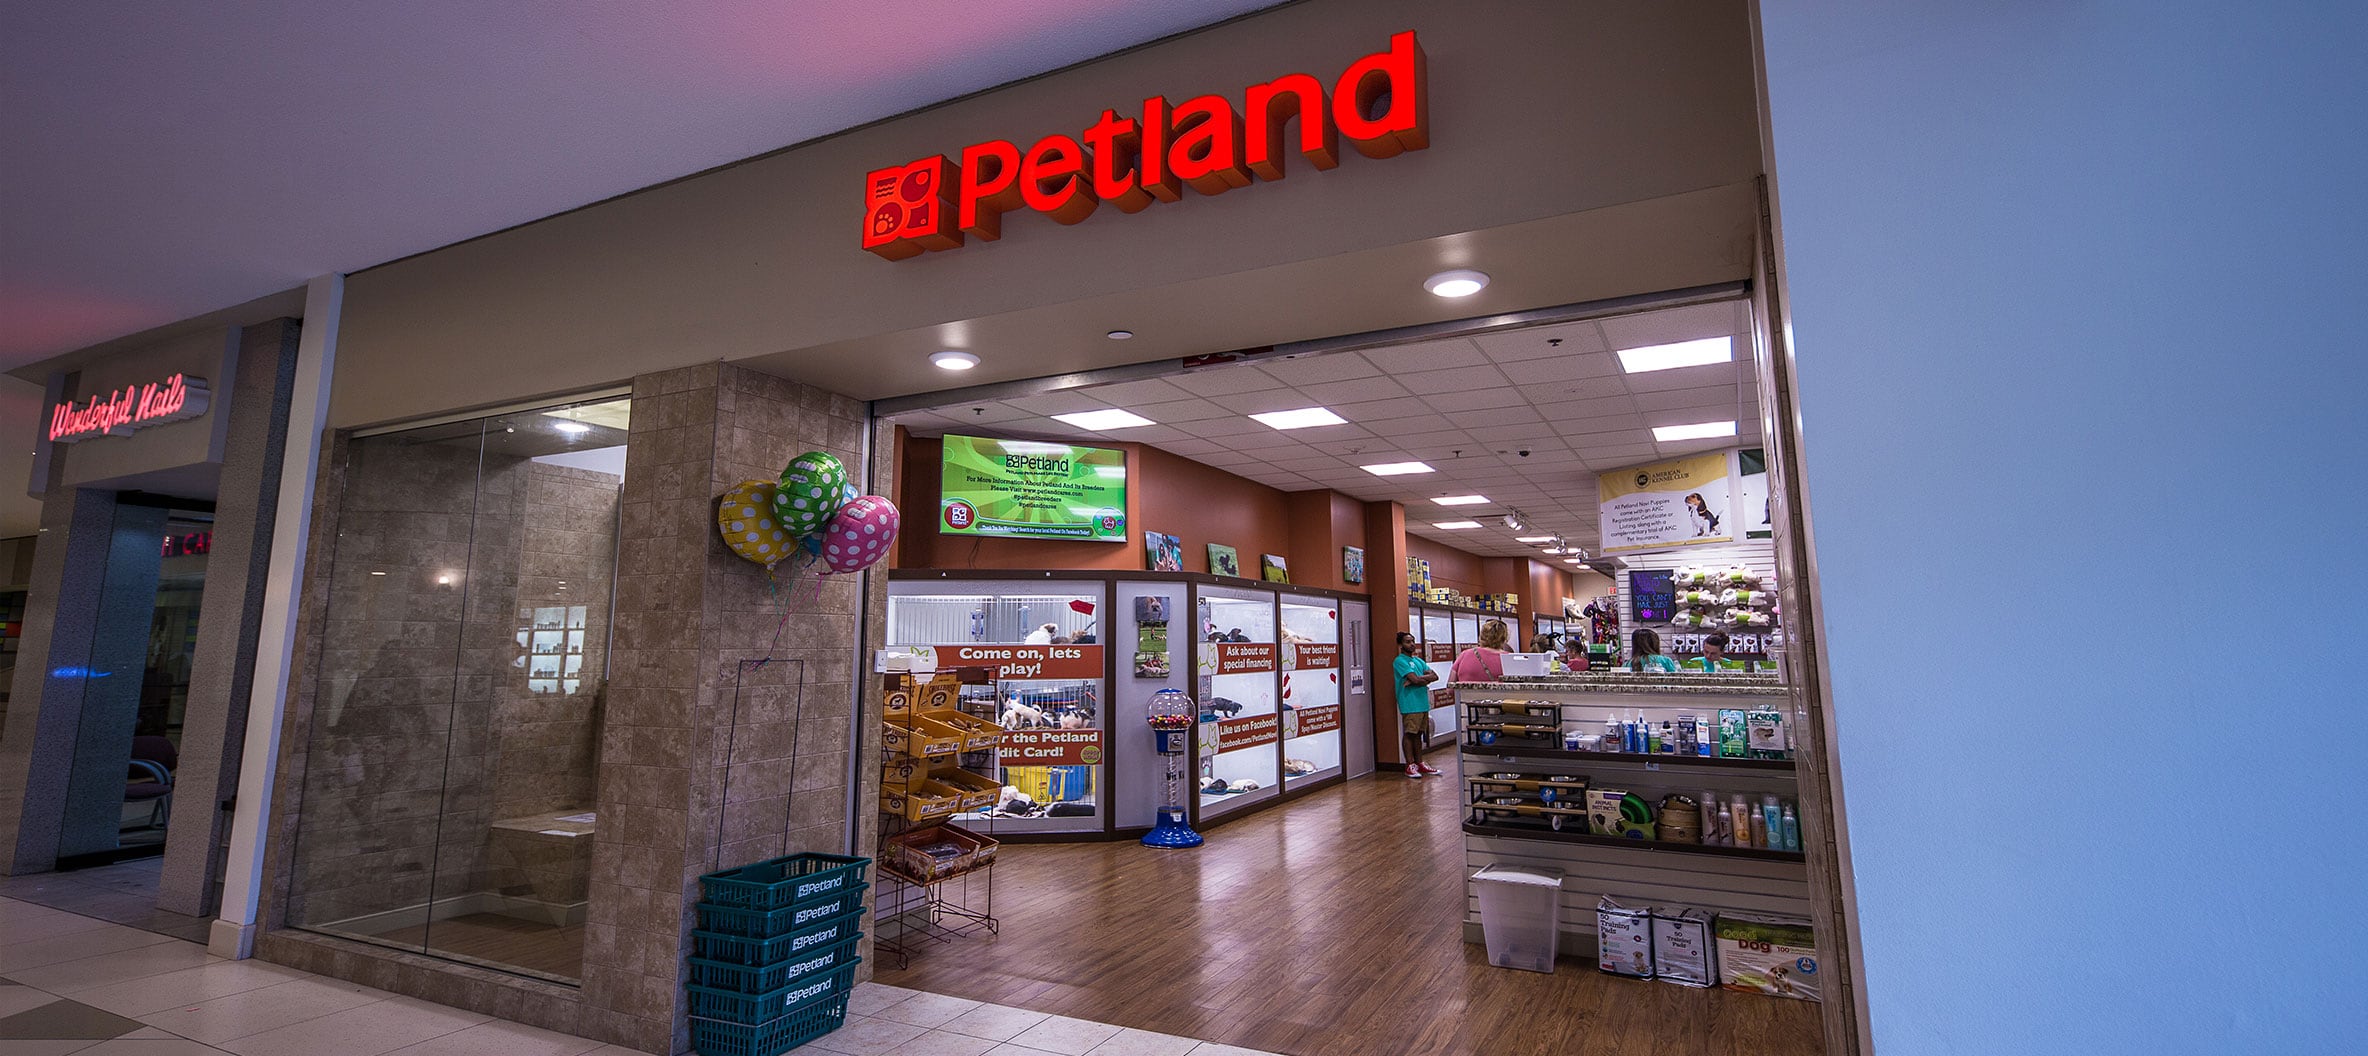 Why Petland is So Expensive?